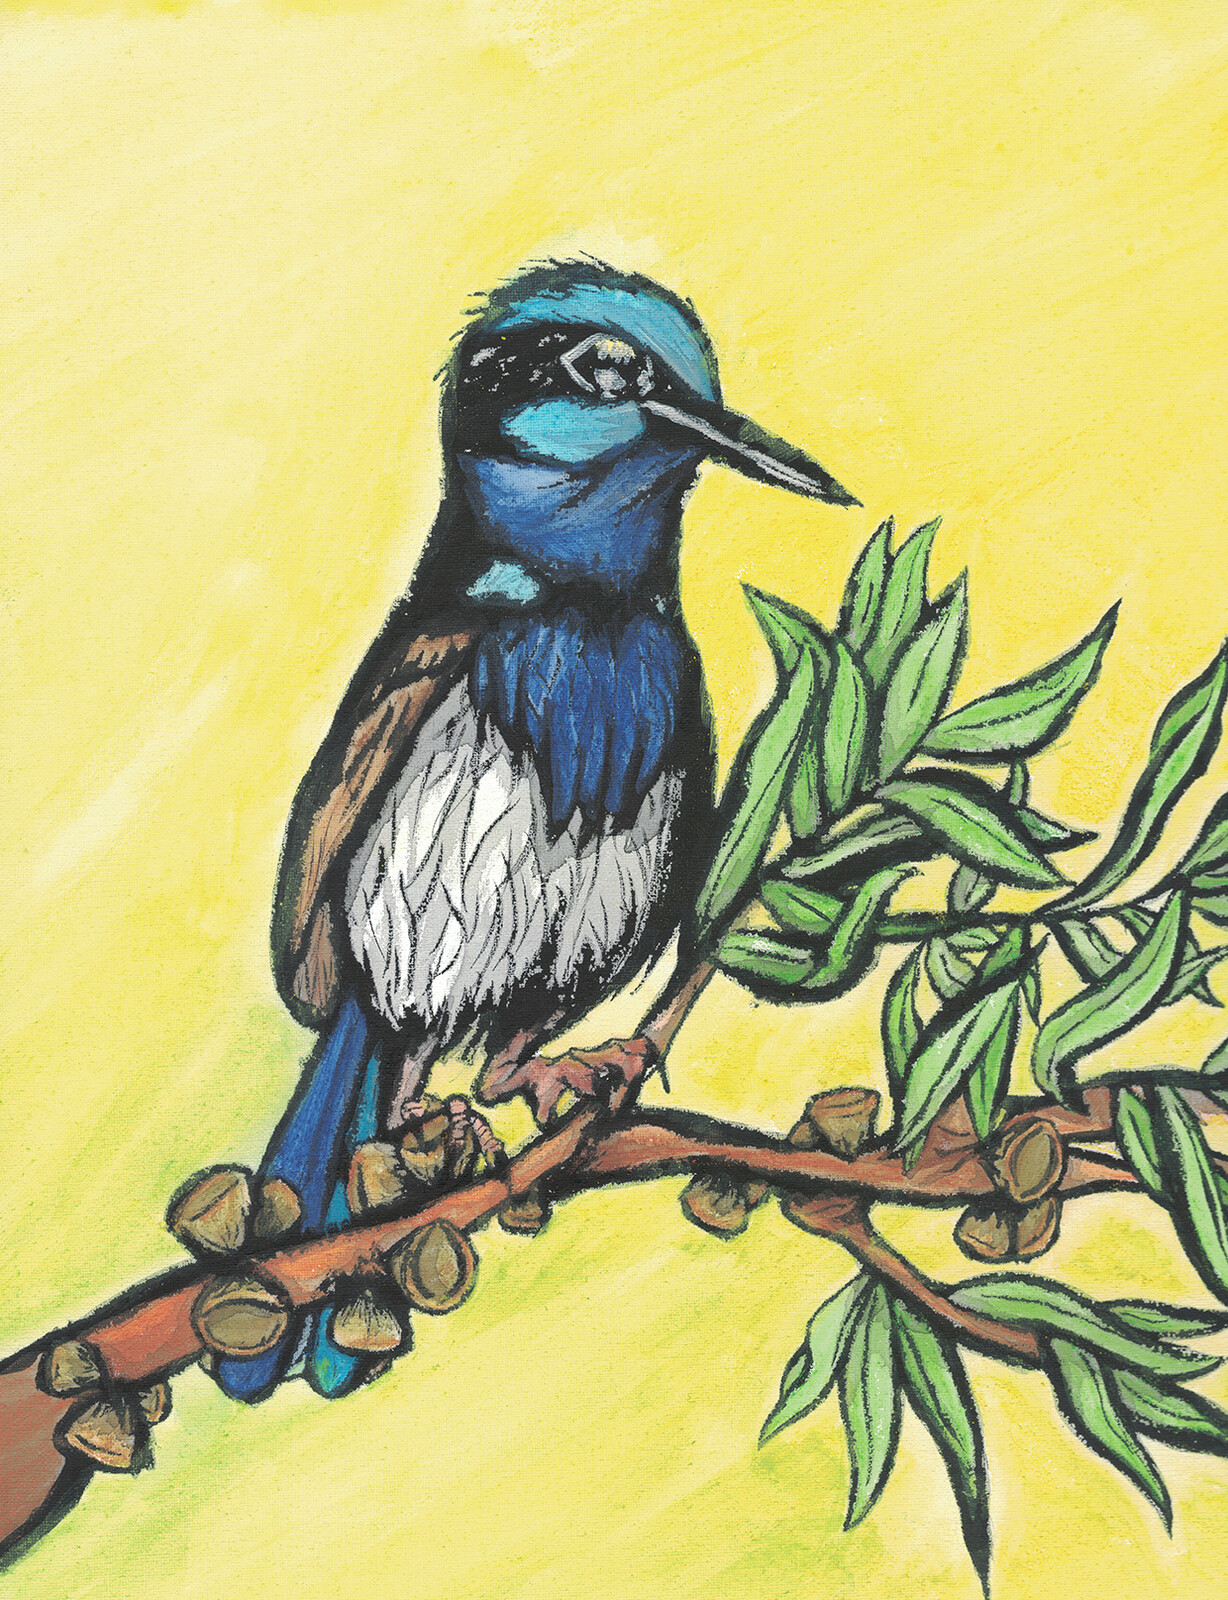 Ended up fully coloring this with watercolor pencils. Quite happy with how the Superb little bird turned out.